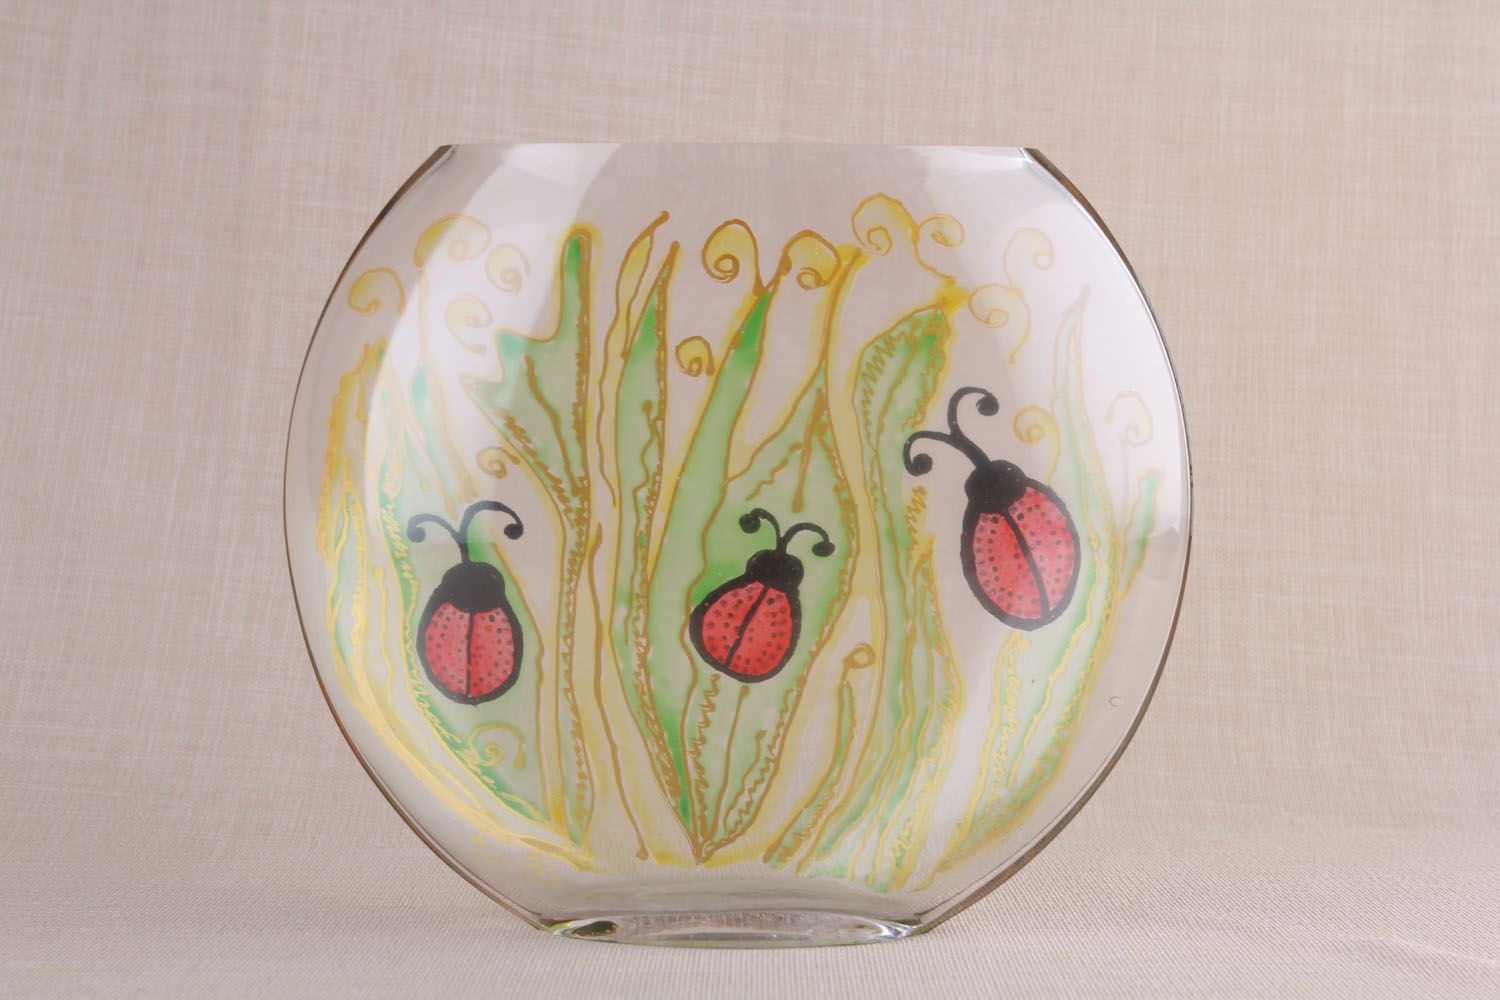 8 inches in diameter glass ball shape vase with ladybugs 2,5 lb photo 2